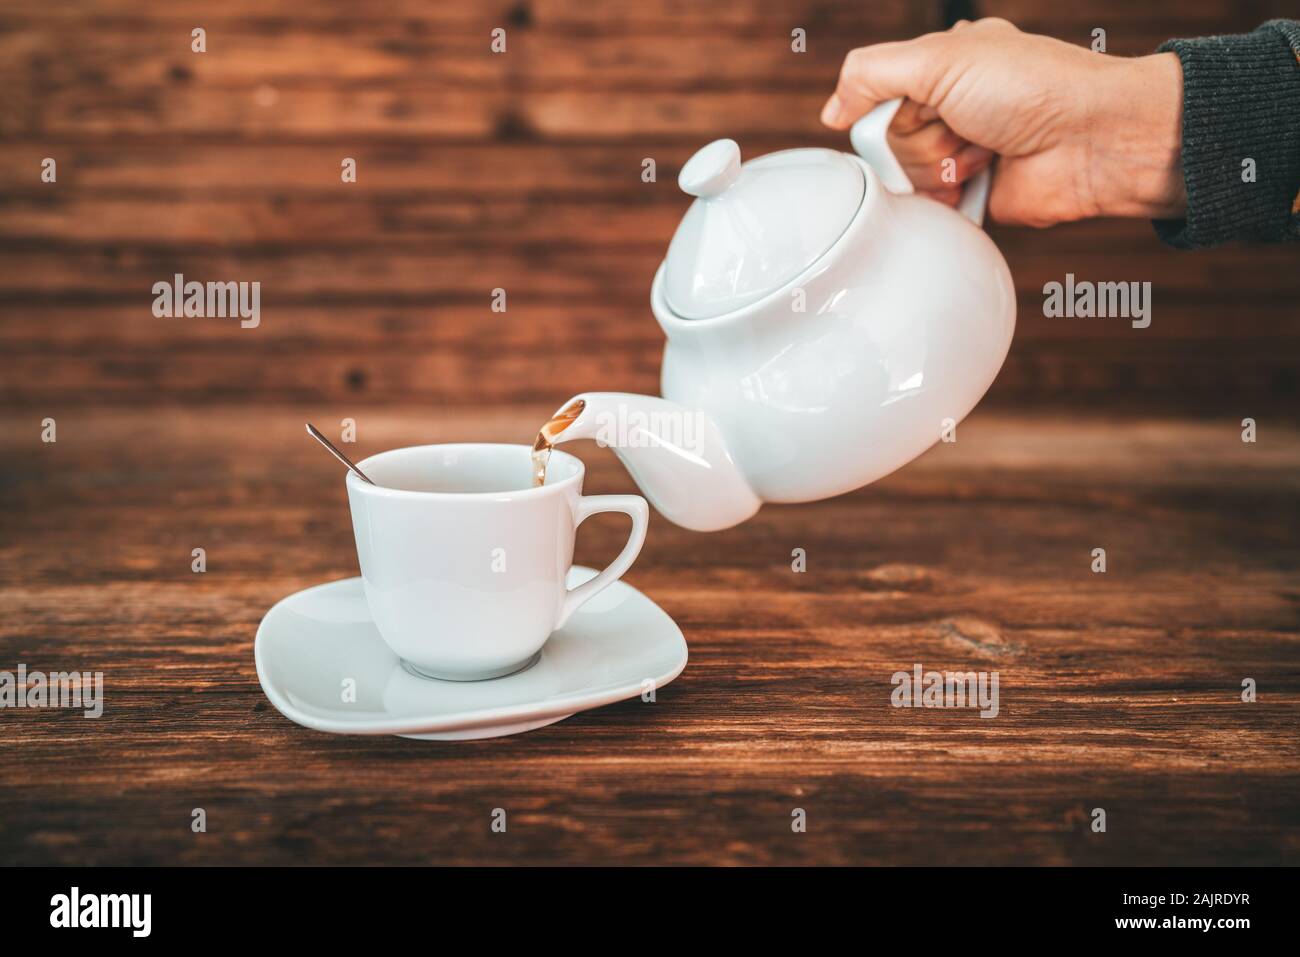 Tea time, brewing and pouring tea, cup of freshly brewed tea, warm soft and light, with wooden background. Stock Photo